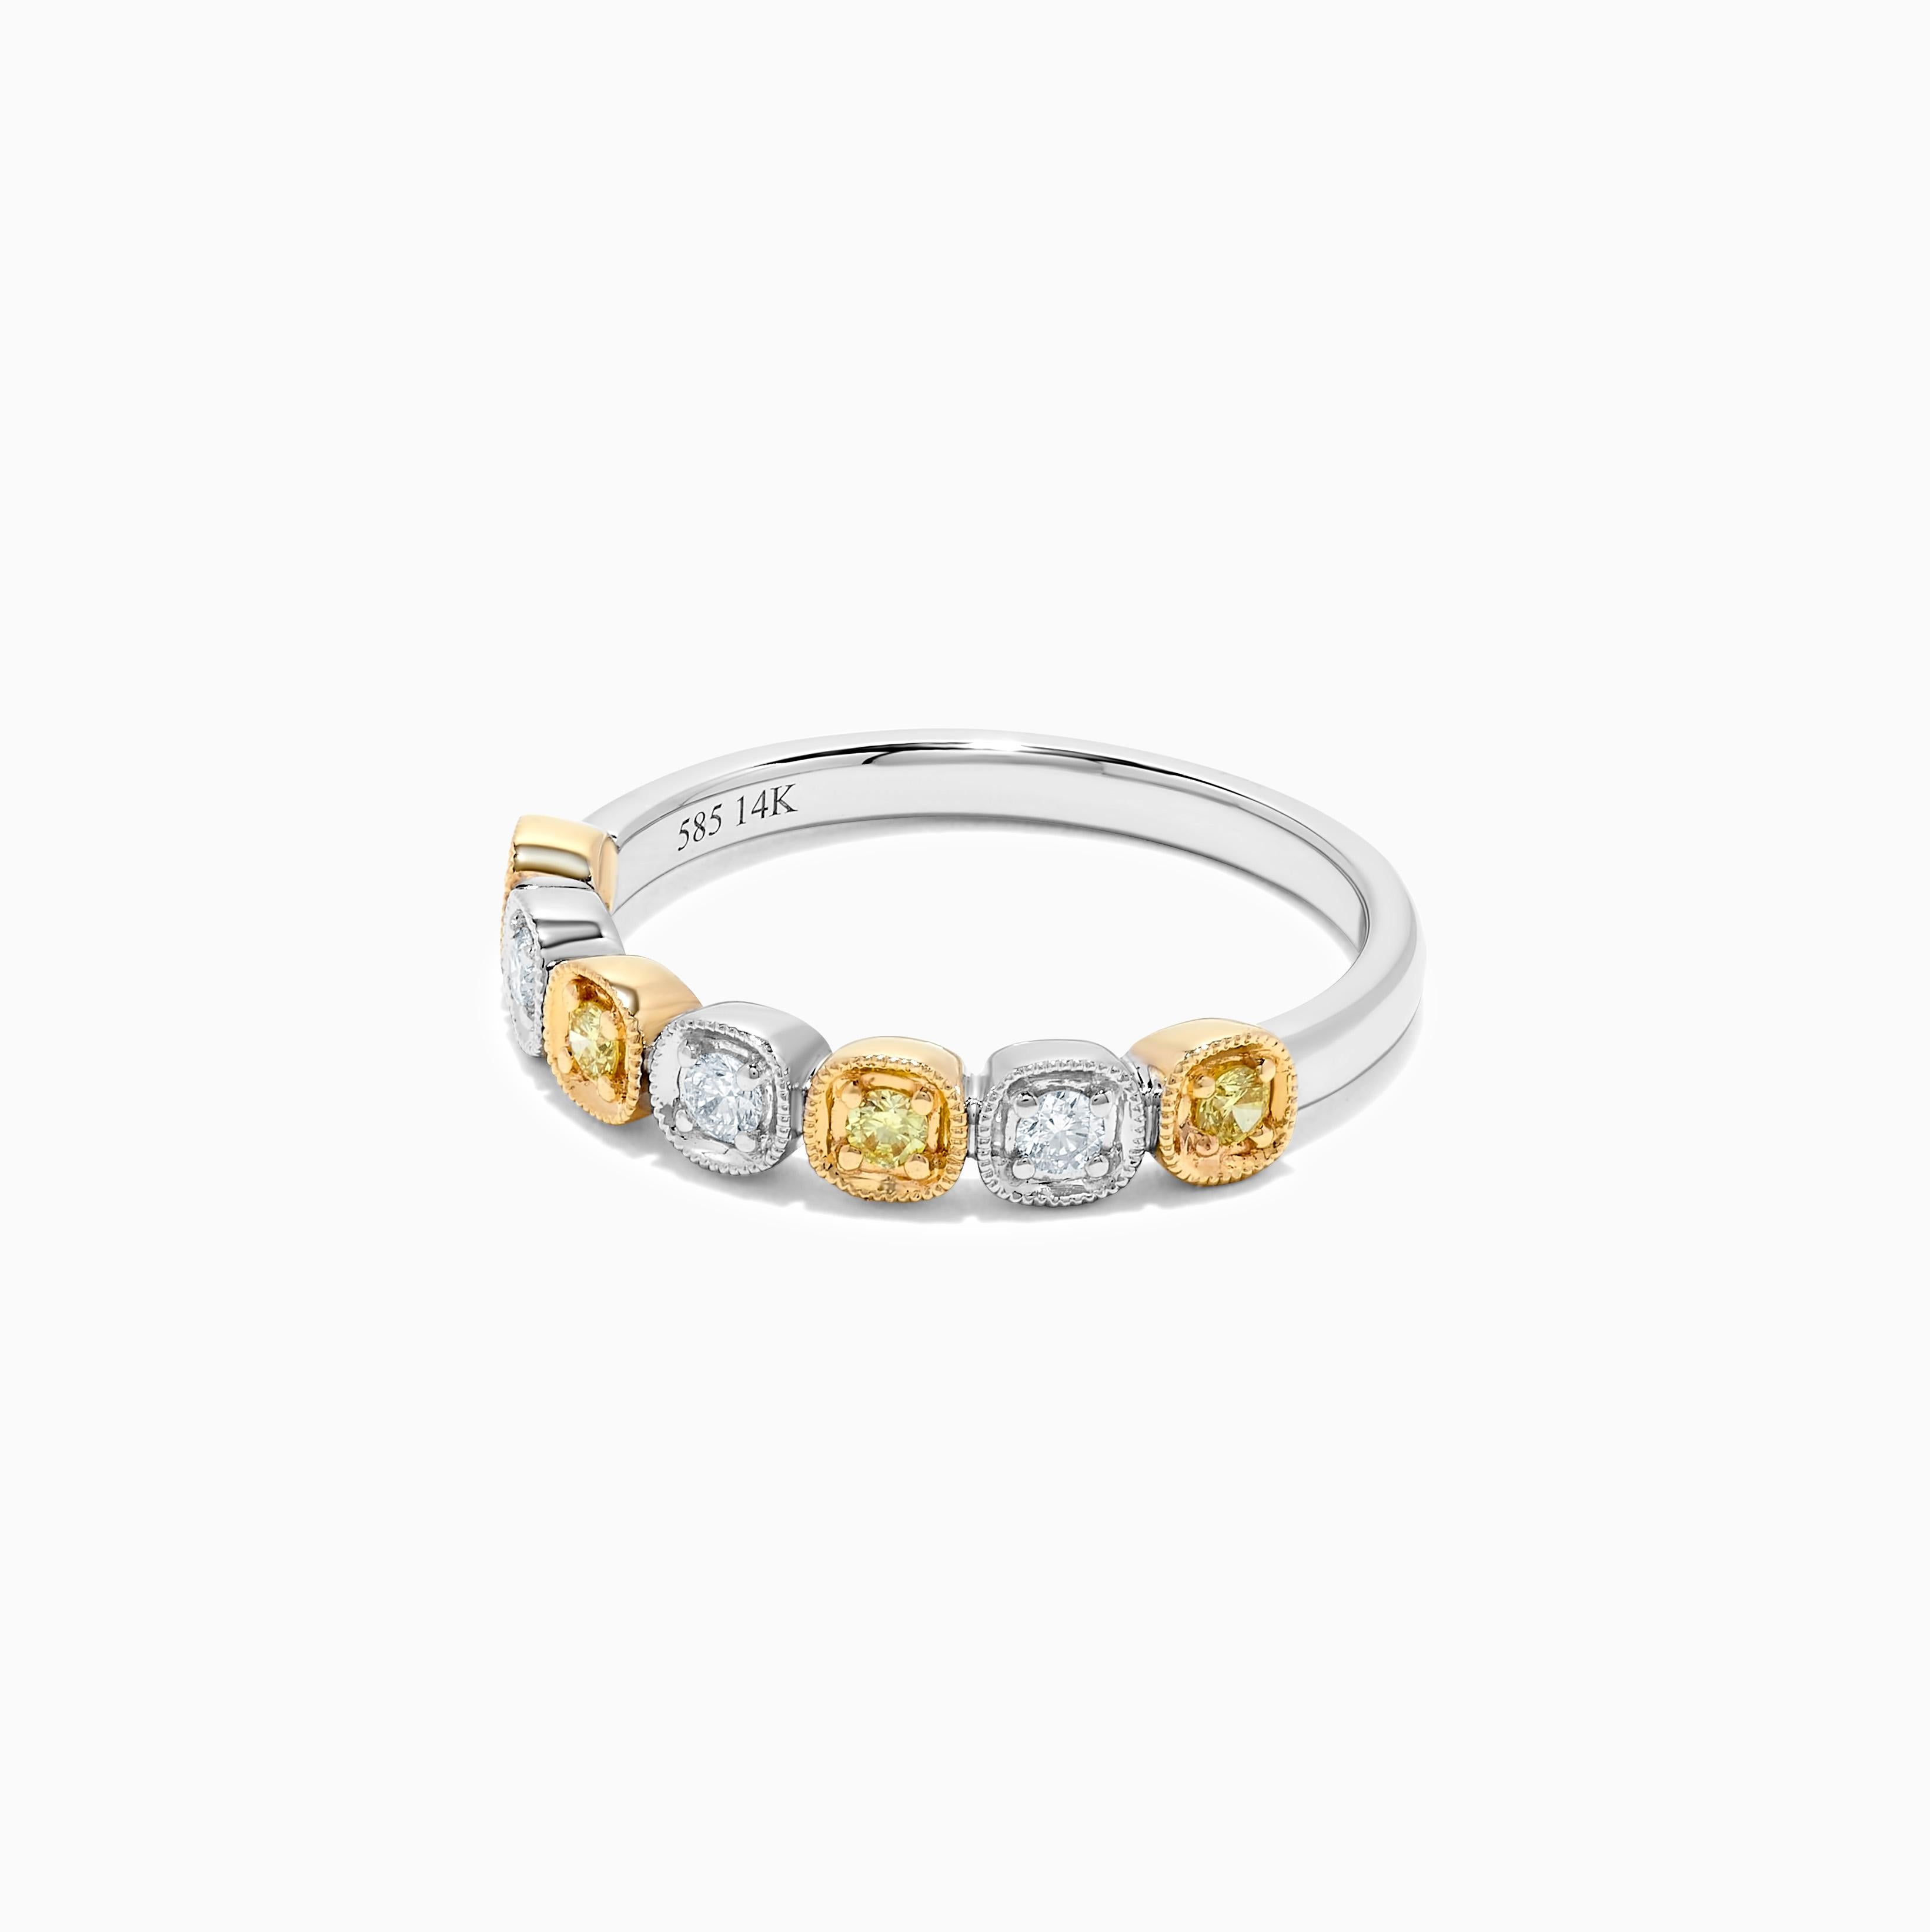 RareGemWorld's classic diamond band. Mounted in a beautiful 14K Yellow and White Gold setting with natural round yellow diamond melee complimented by natural round white diamond melee. This band is guaranteed to impress and enhance your personal